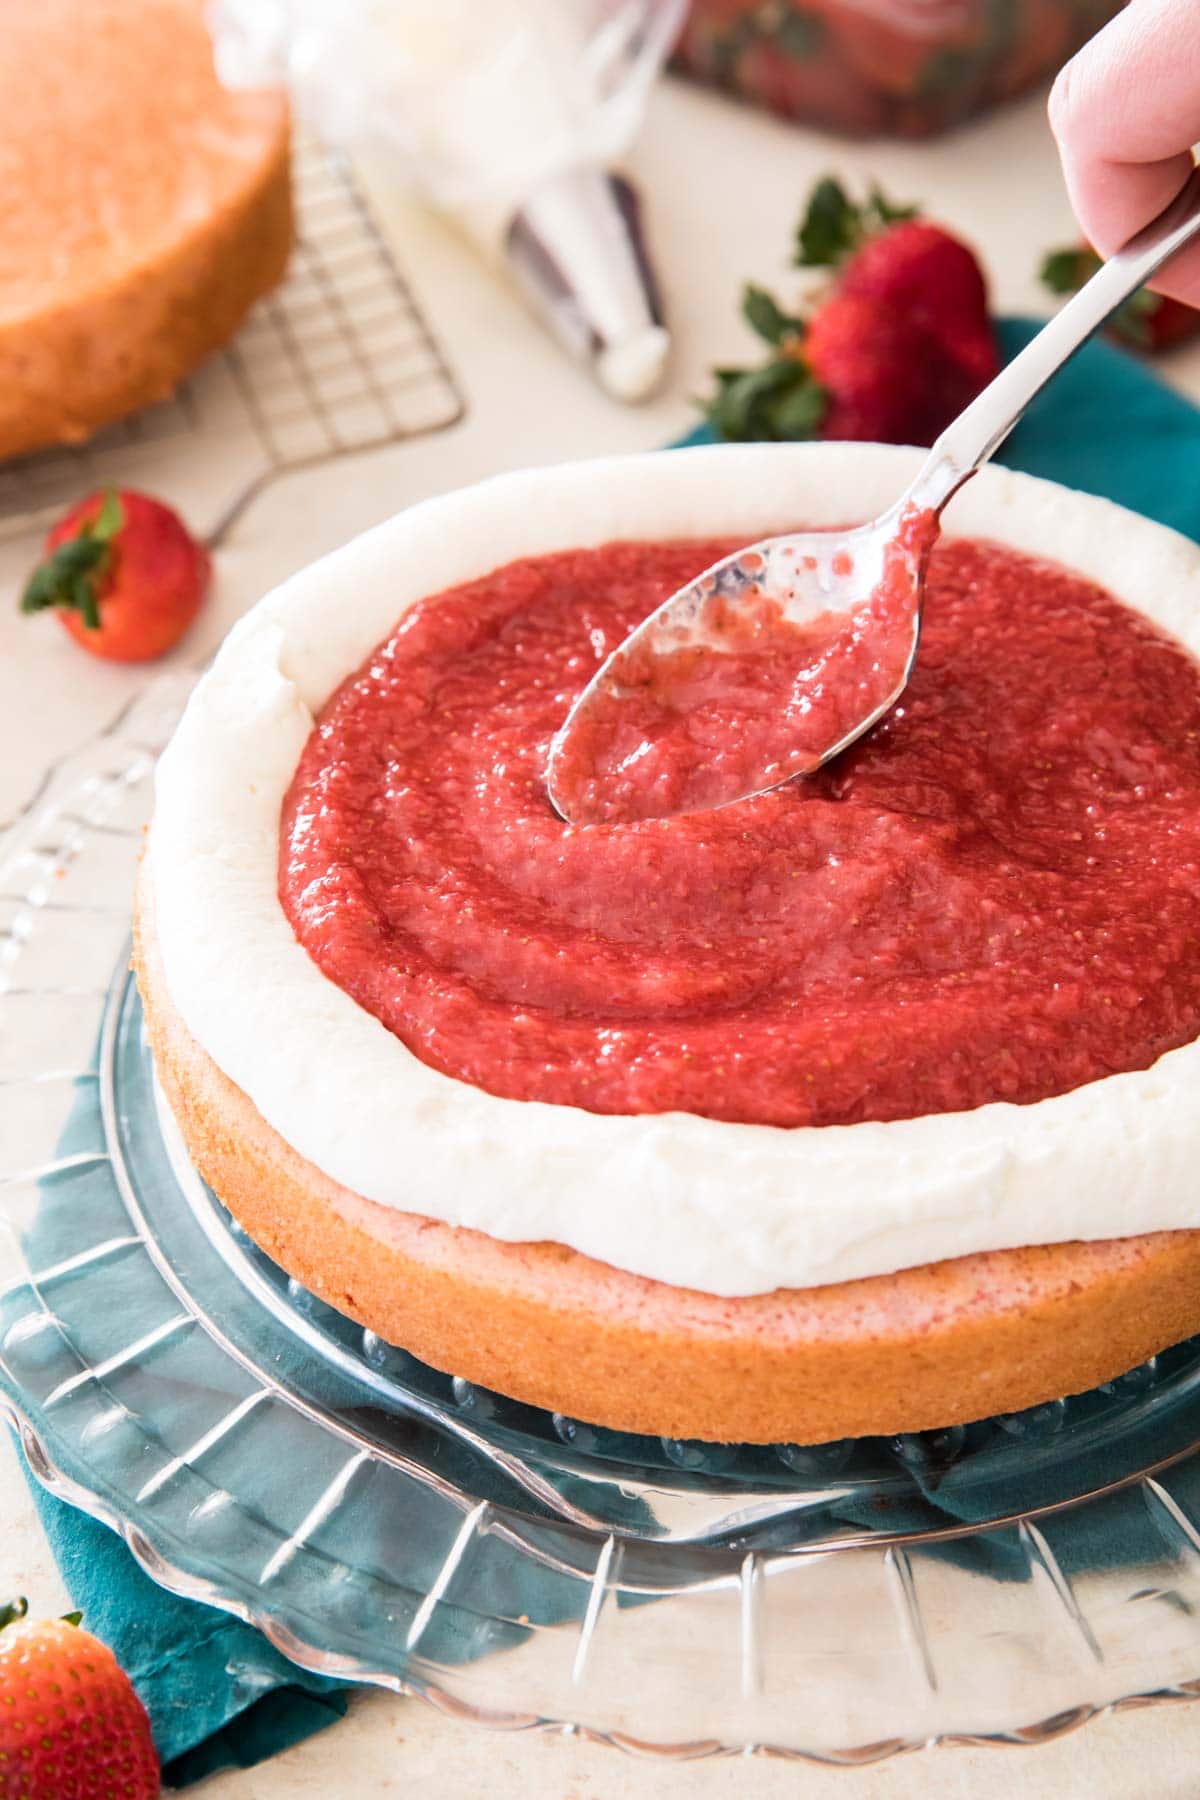 spooning strawberry jam into frosting dam on strawberry cake layer